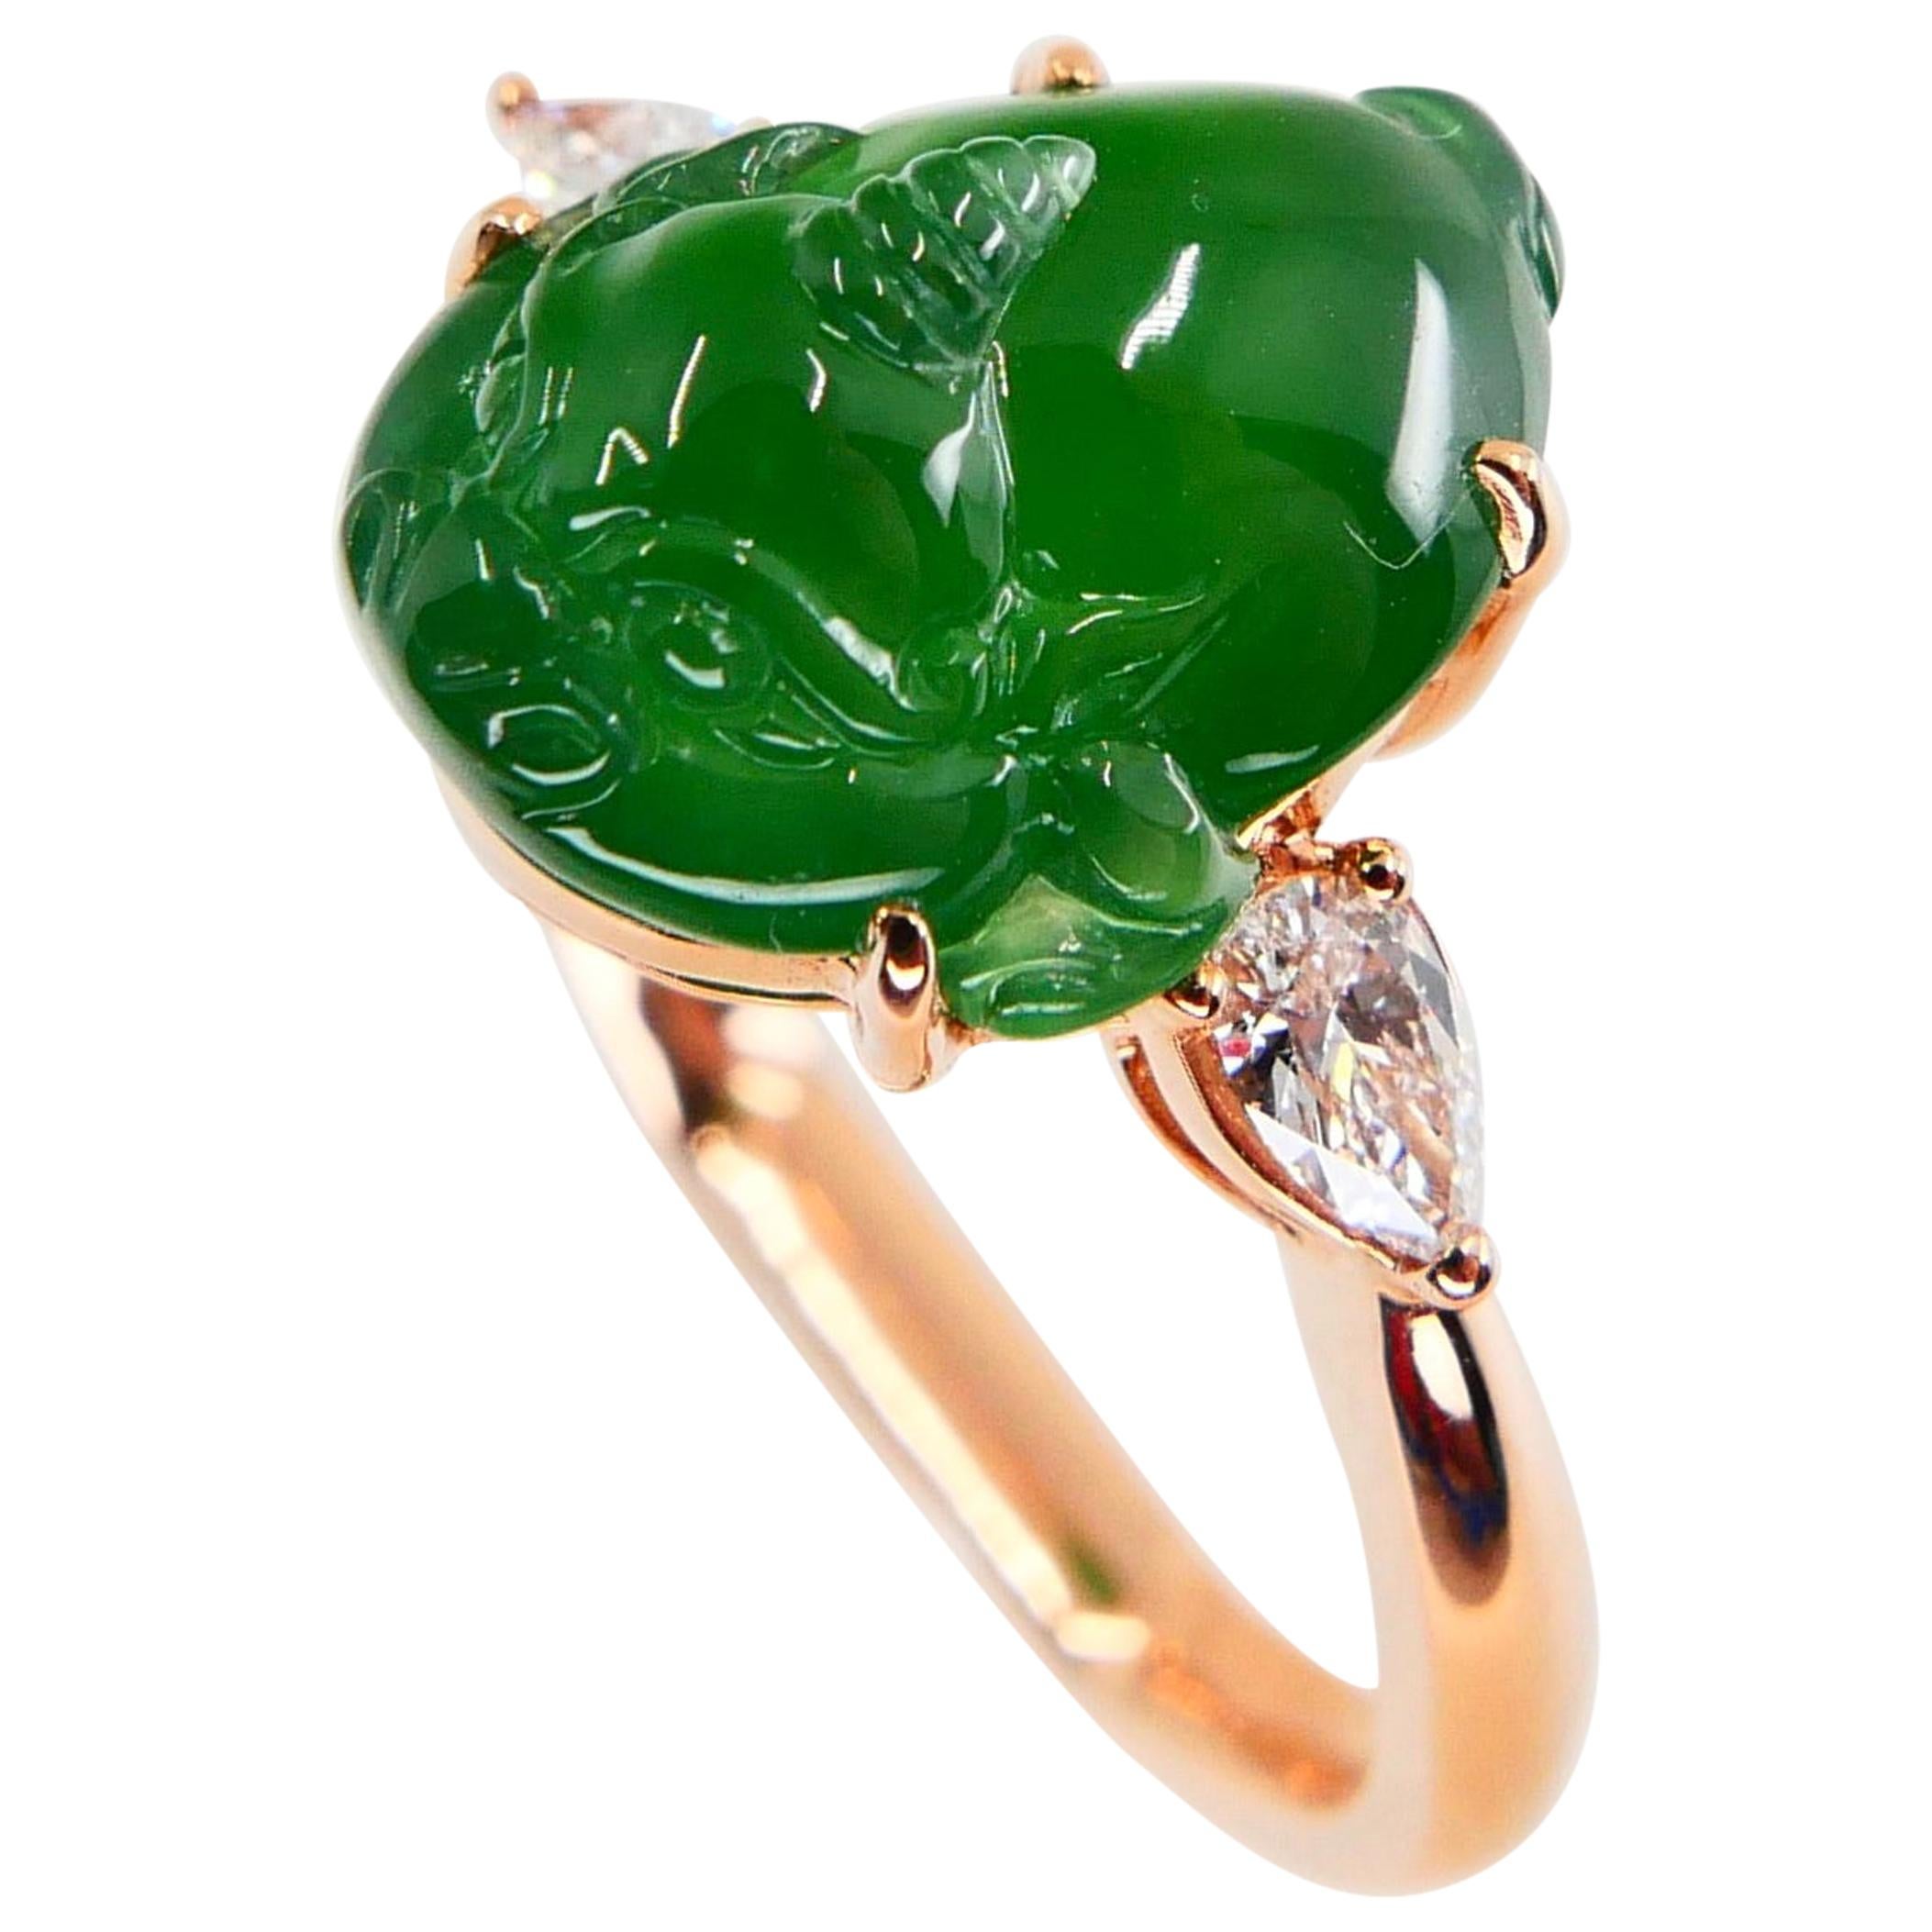 Certified 5.29 Carat Type A Jade and Diamond Cocktail Ring, Best Imperial Green